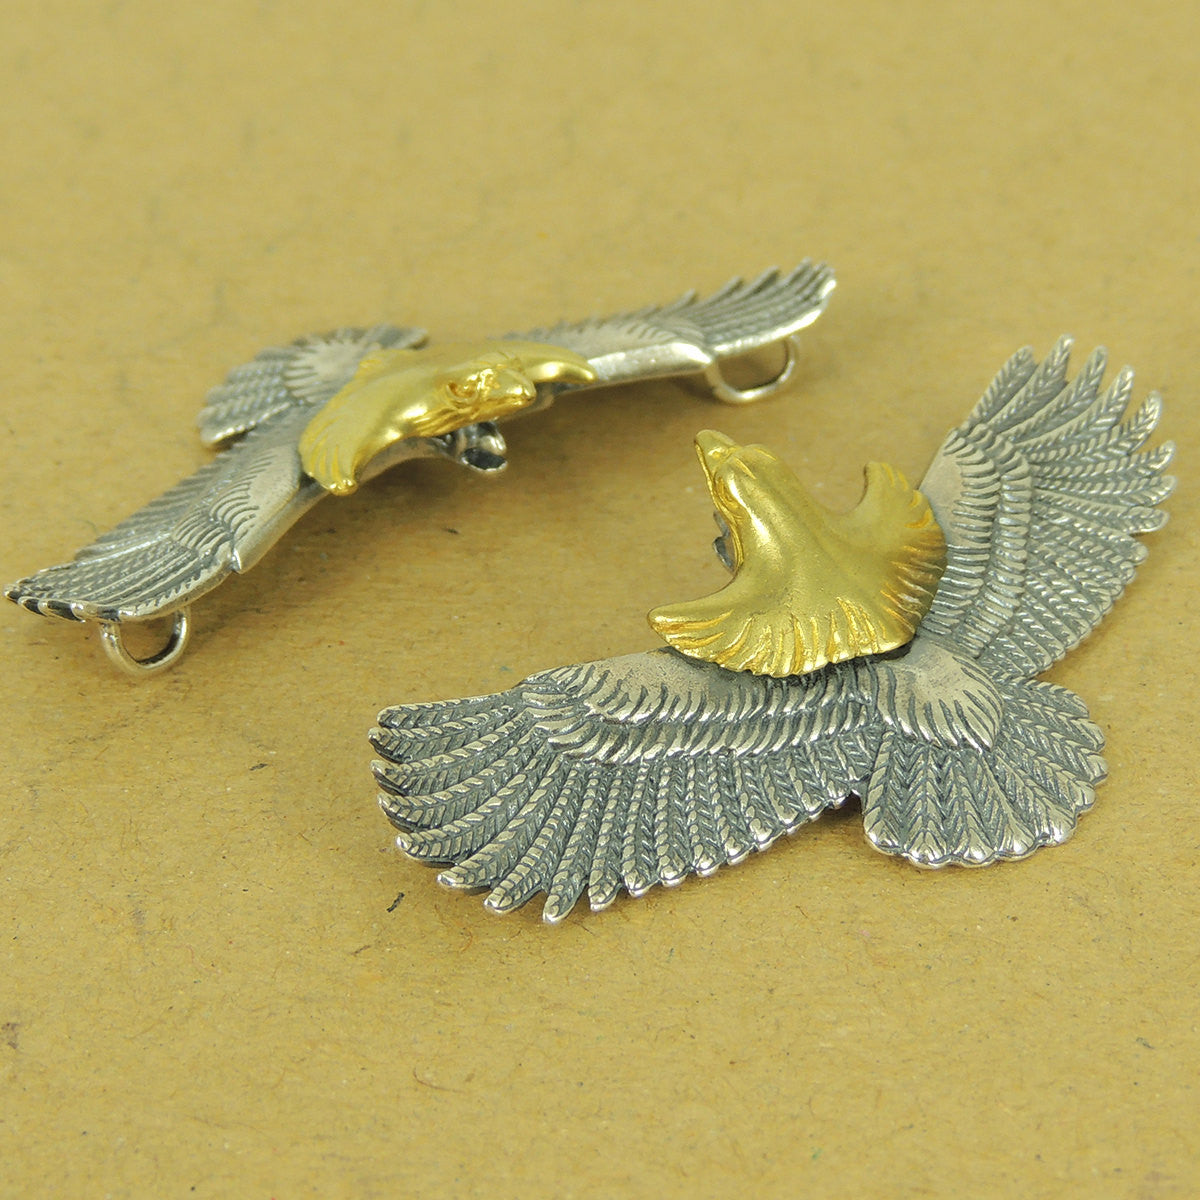 1 PC Vintage Brass Eagle Charm & Pendant - S925 Sterling Silver WSP528X1